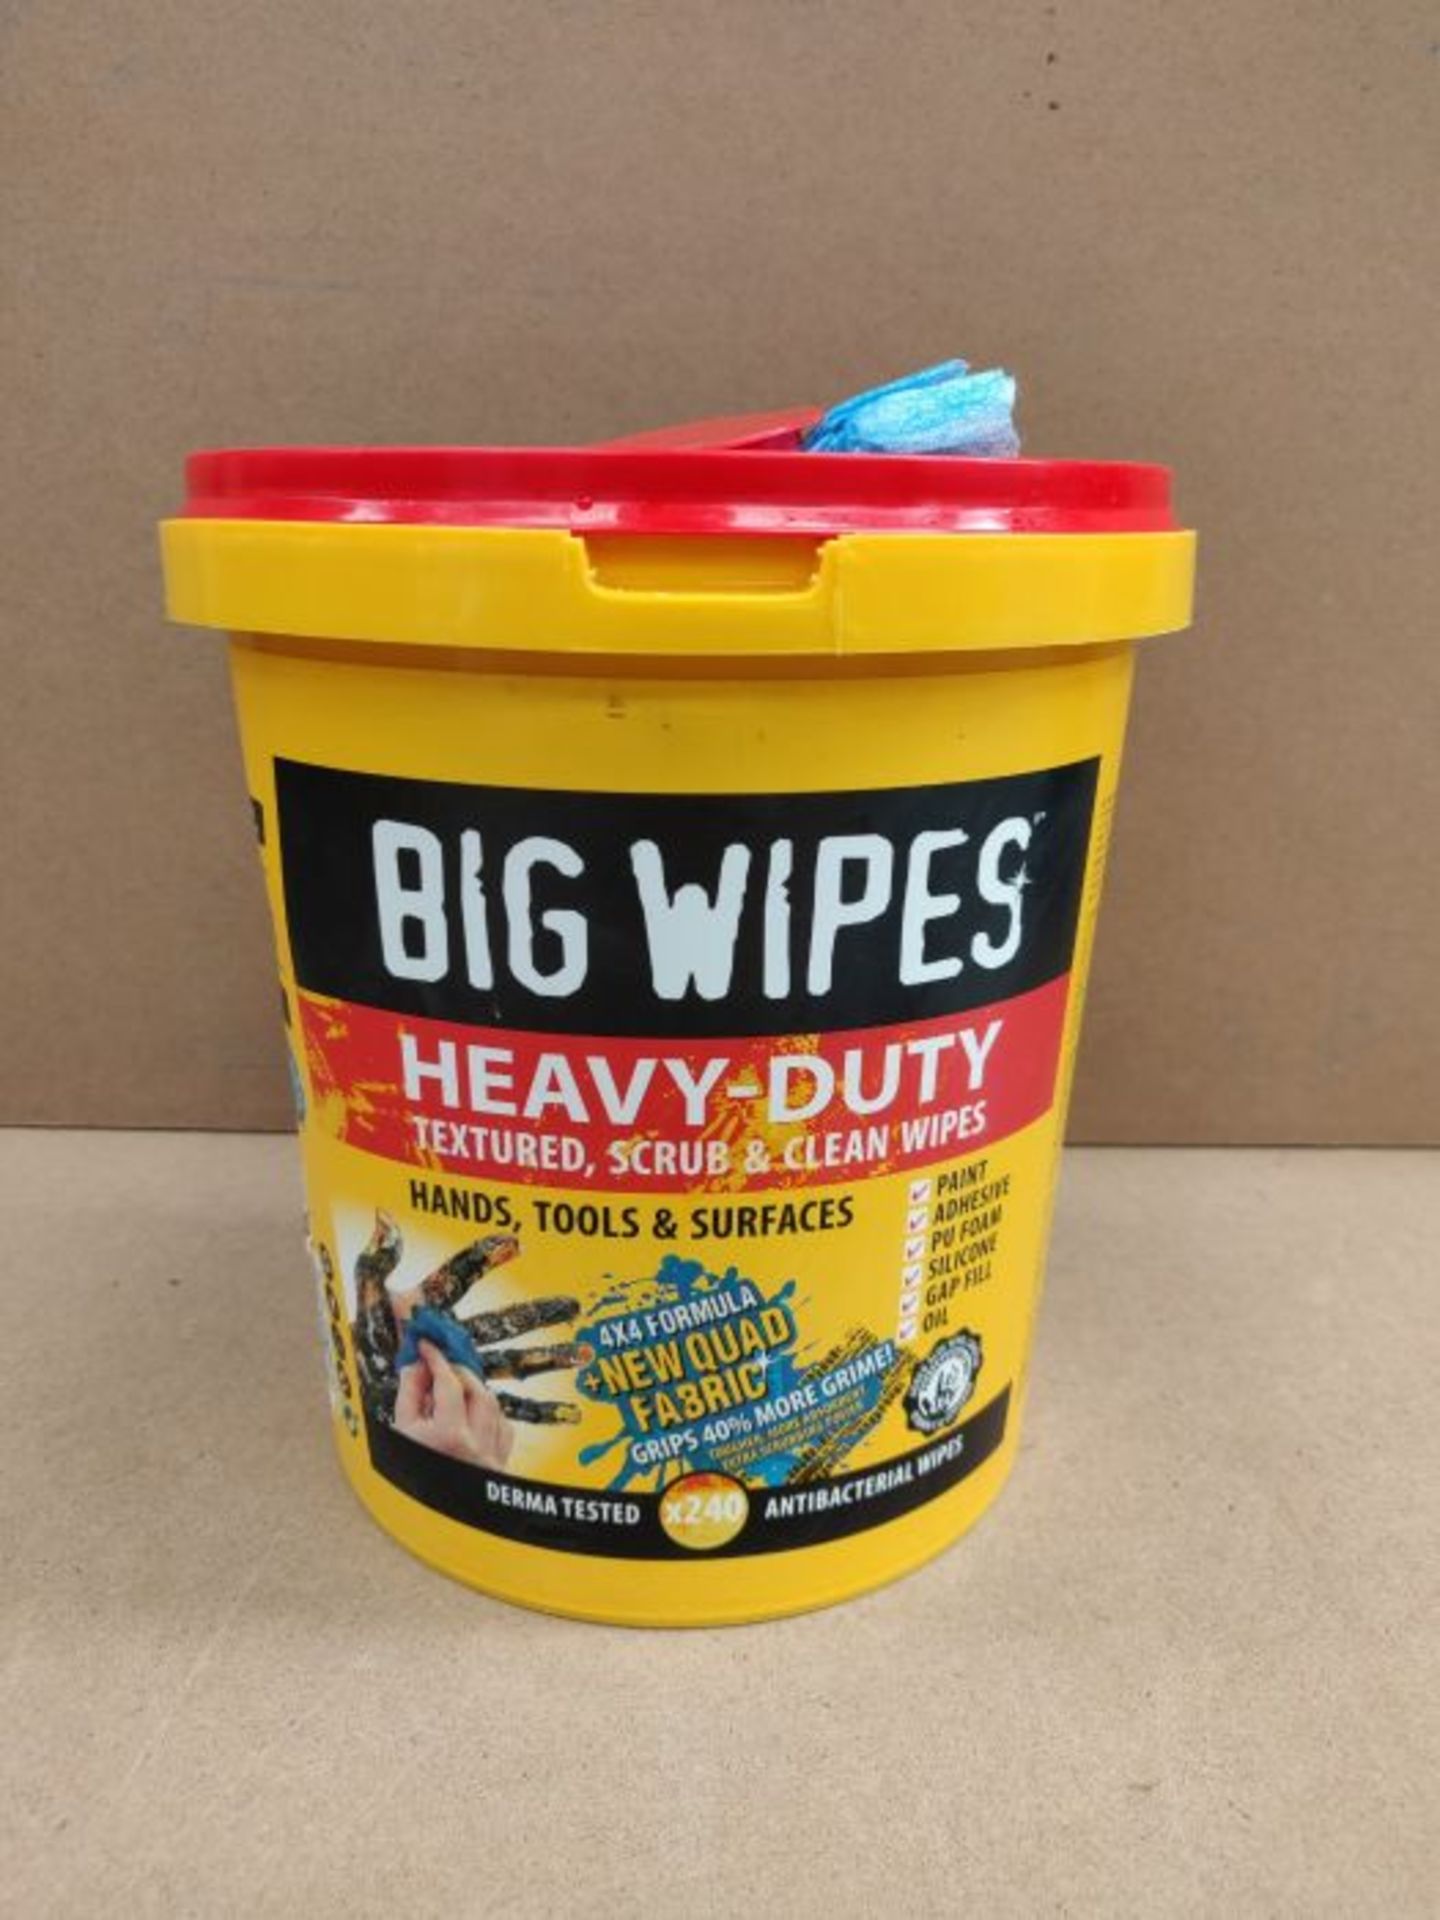 Big Wipes 2427 4 x 4-inch Heavy Duty Cleaning Wipes (Pack of 240) - Image 2 of 2